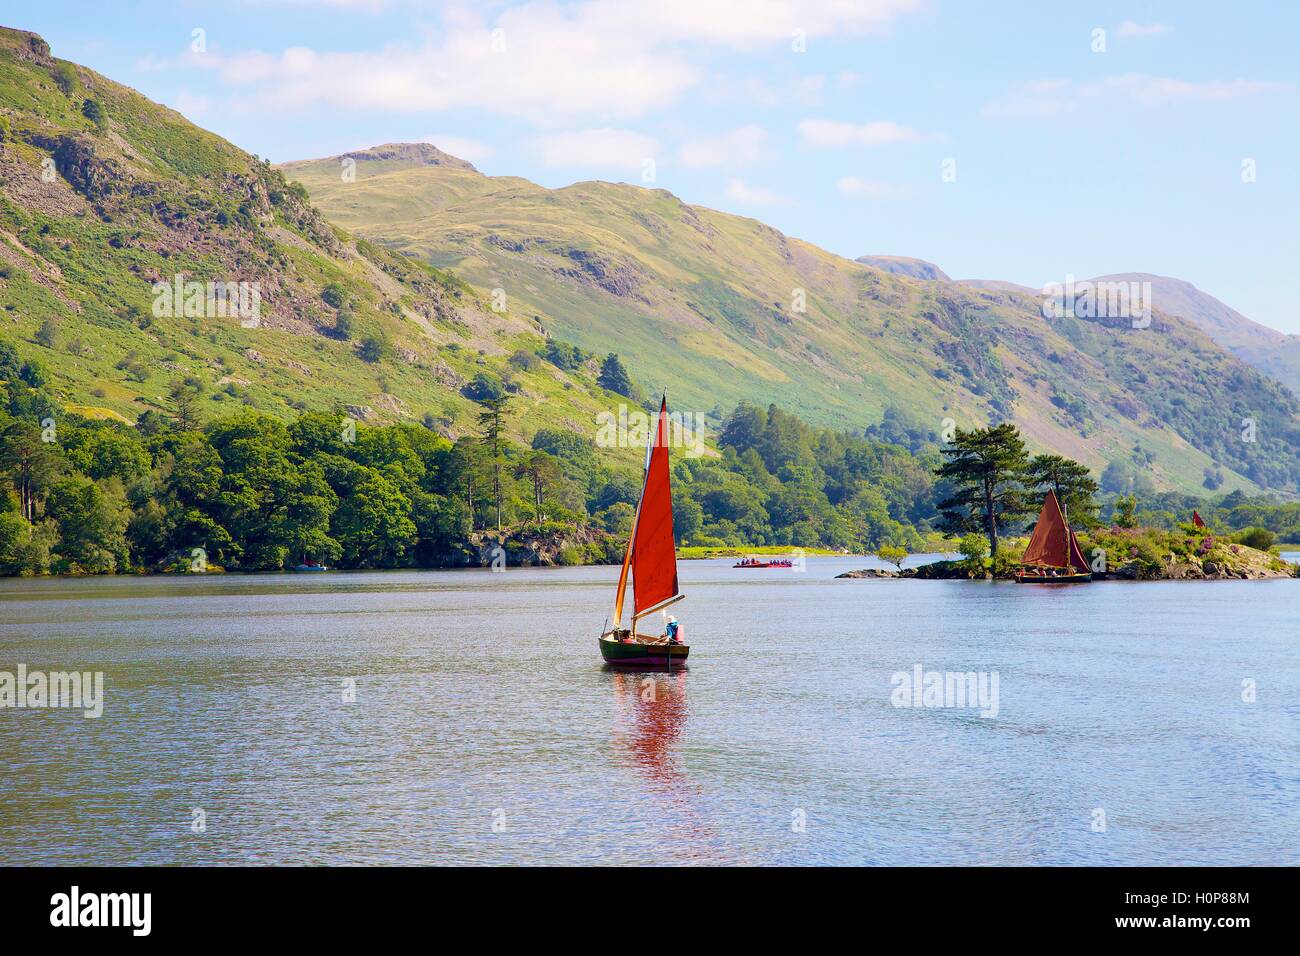 Red sailed boat sailing near Wall Holm island. Ullswater, Penrith, The Lake District National Park, Cumbria, England, UK. Stock Photo